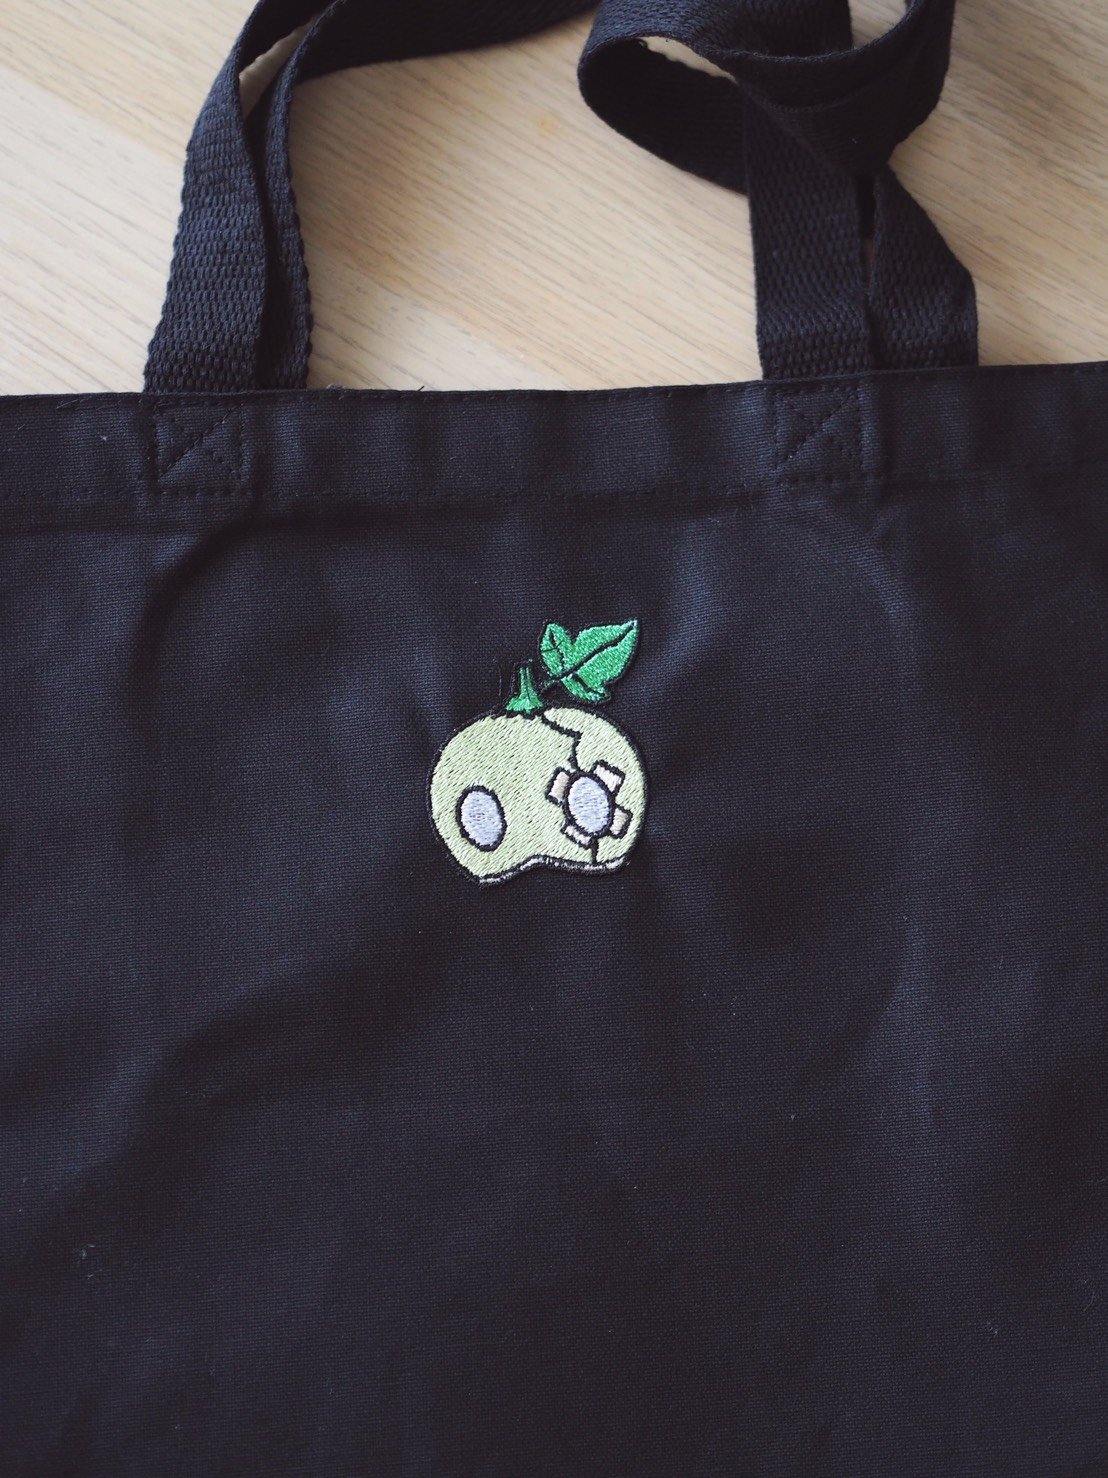 Dr. Stone Suika Embroidery Totes Bags - Moko's Boutique